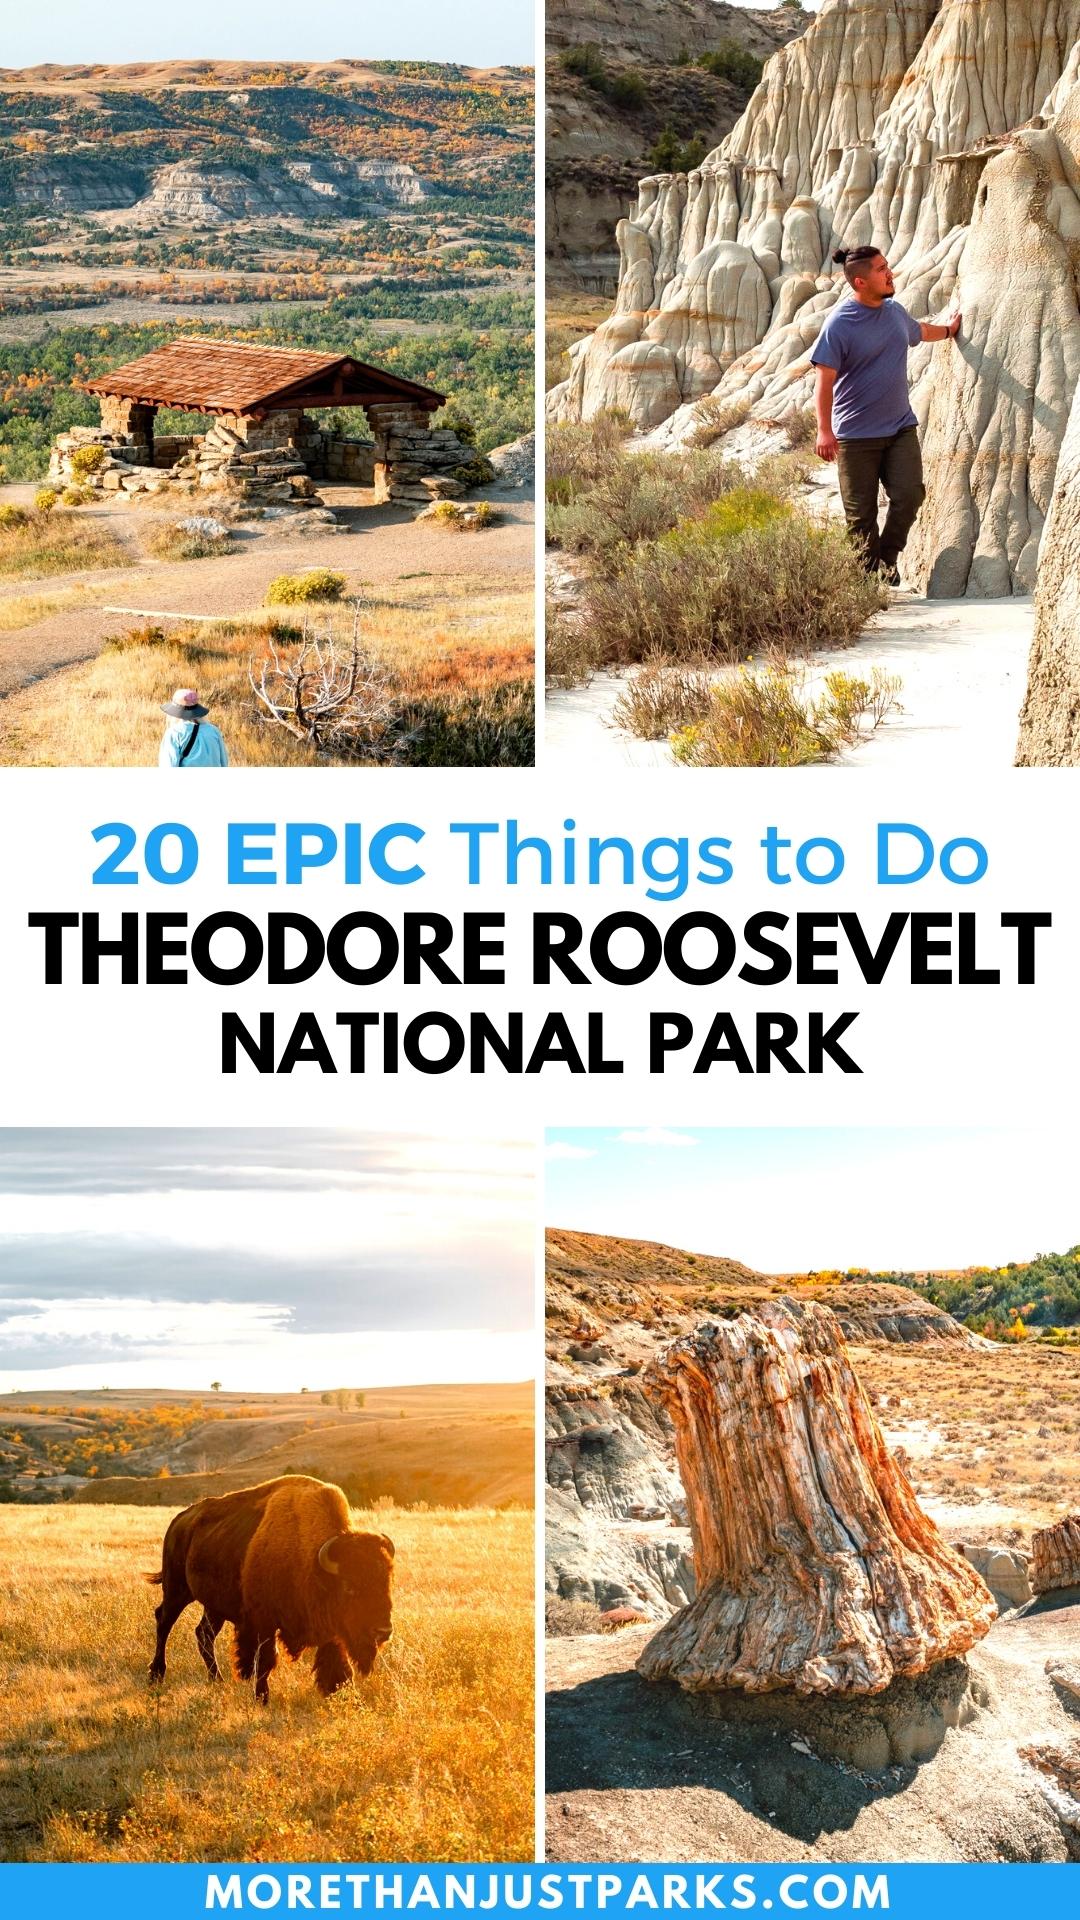 things to do theodore roosevelt national park